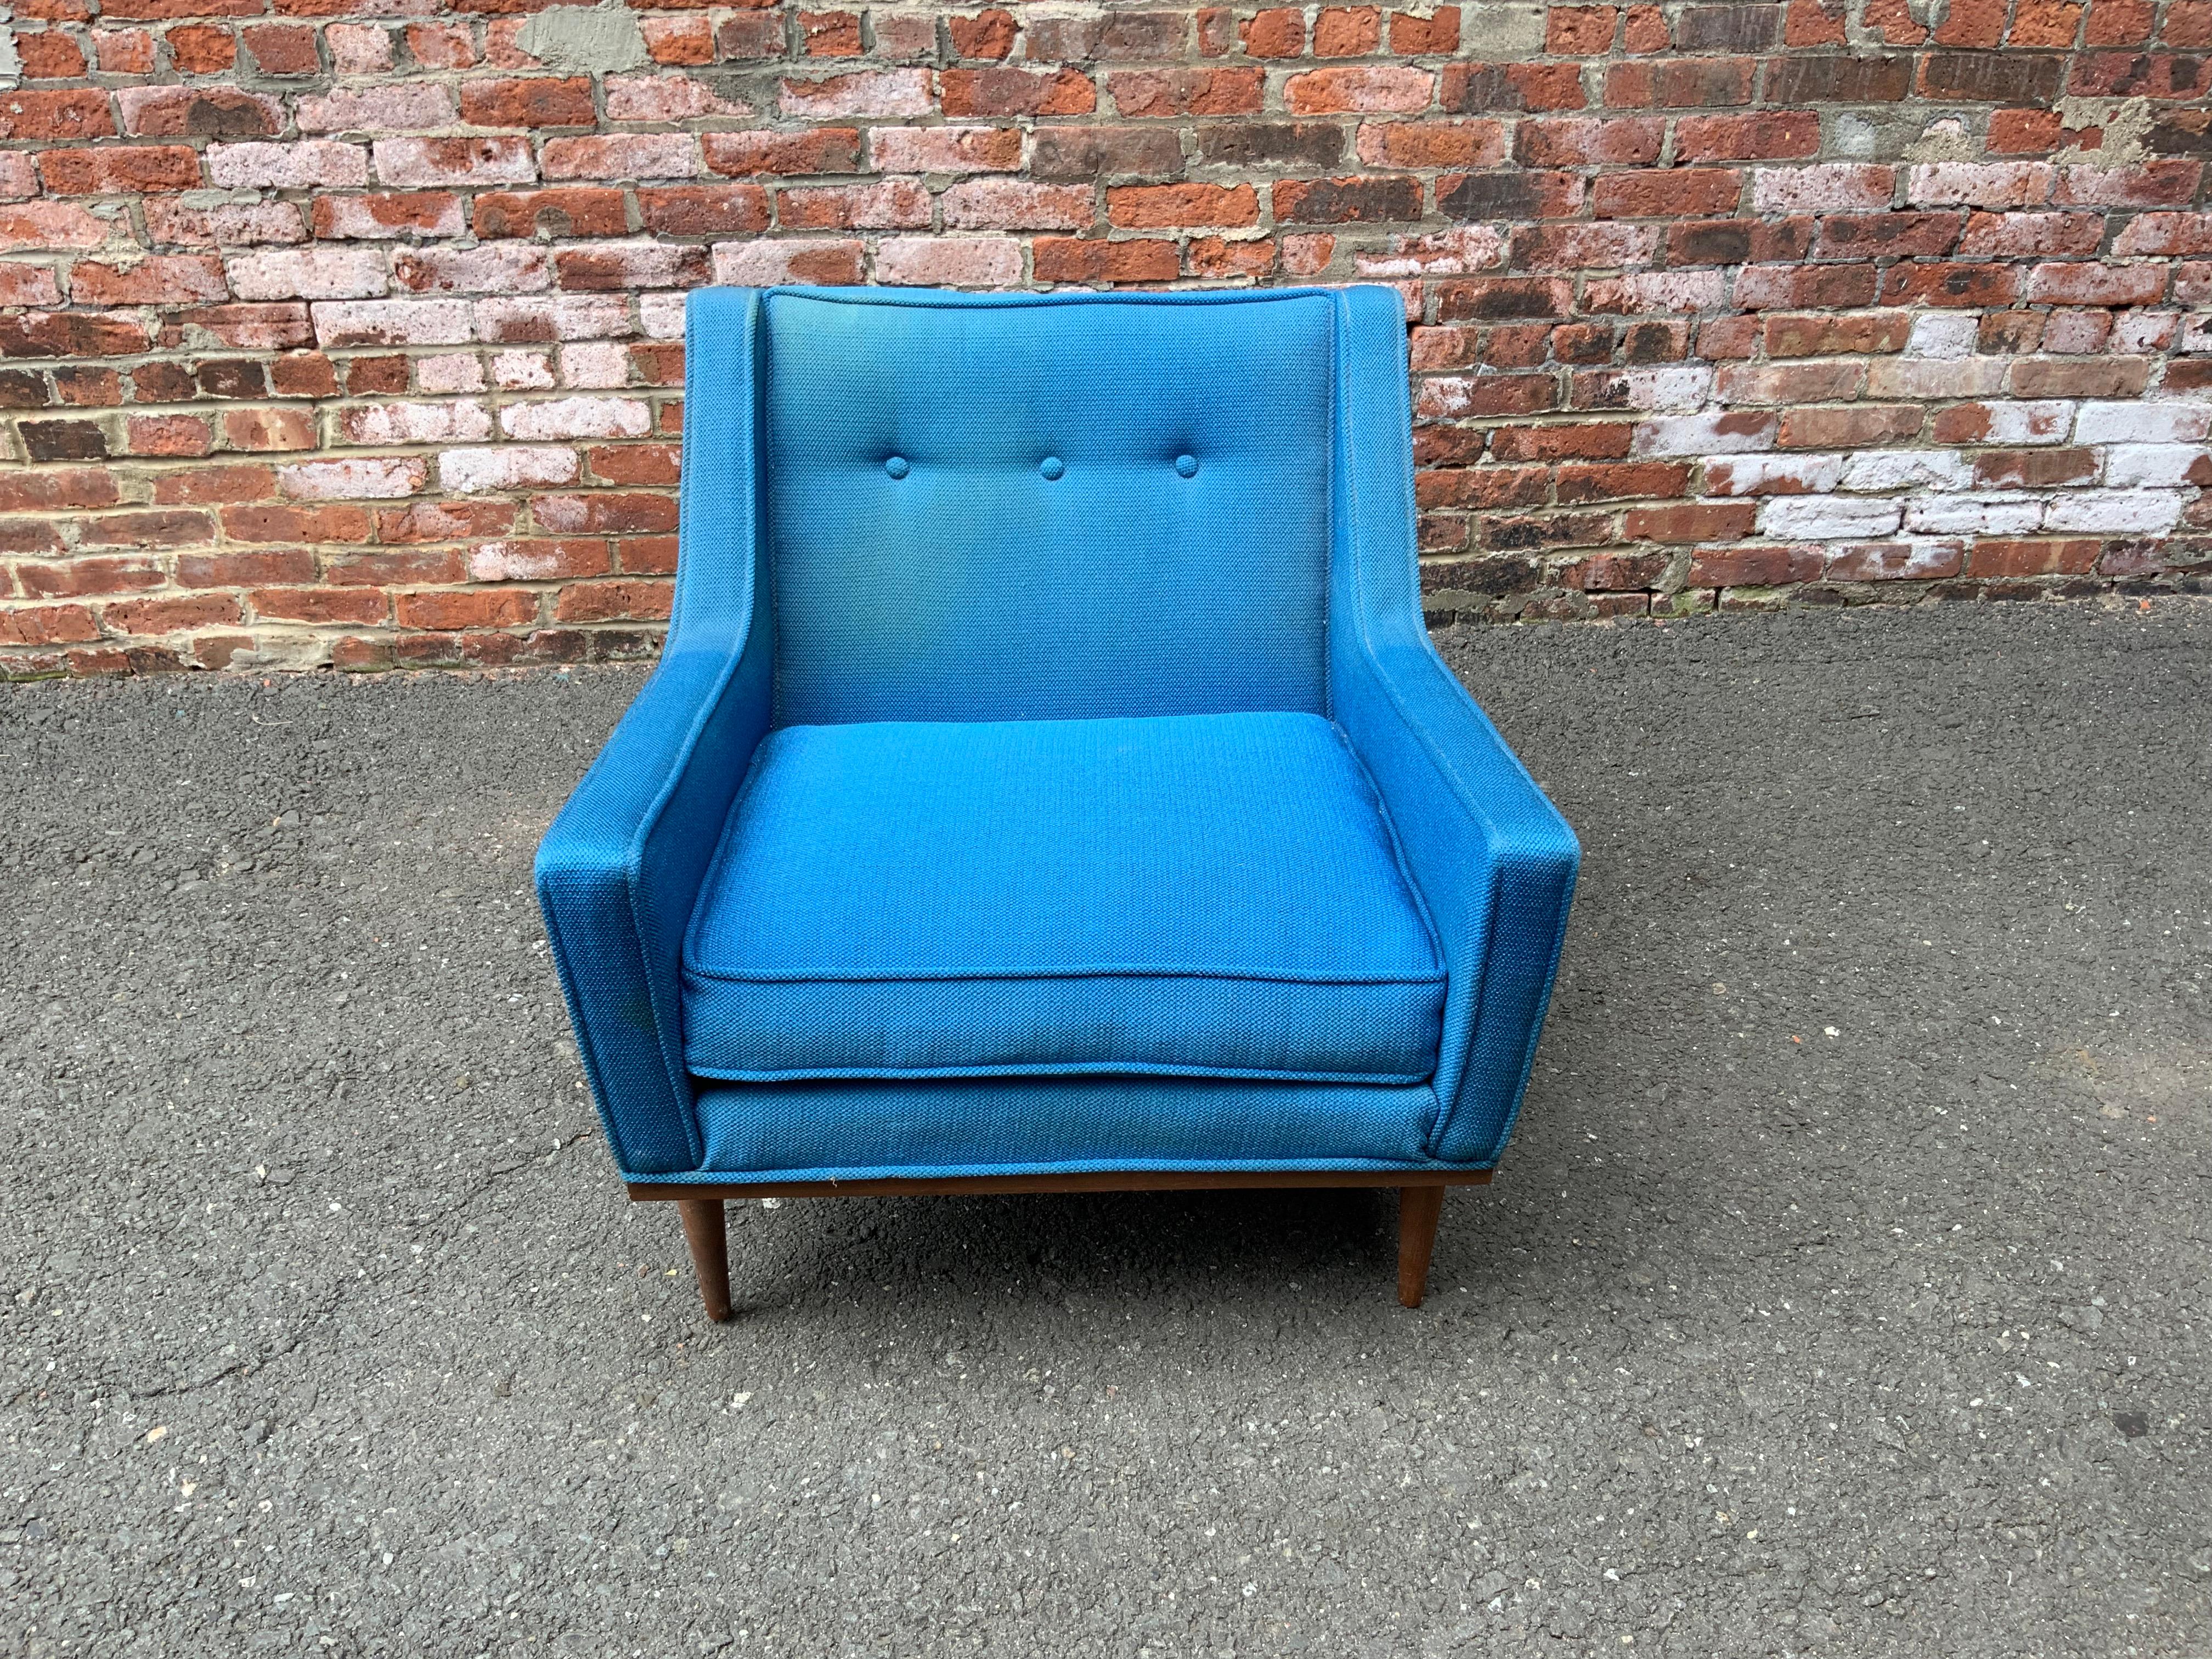 Early Milo Baughman for James Incorporated, High Point, NC. Amazing original royal blue wool upholstery with walnut platform base and legs. Original tag on the base. The angular profile lines just make this chair. Good condition with some minor